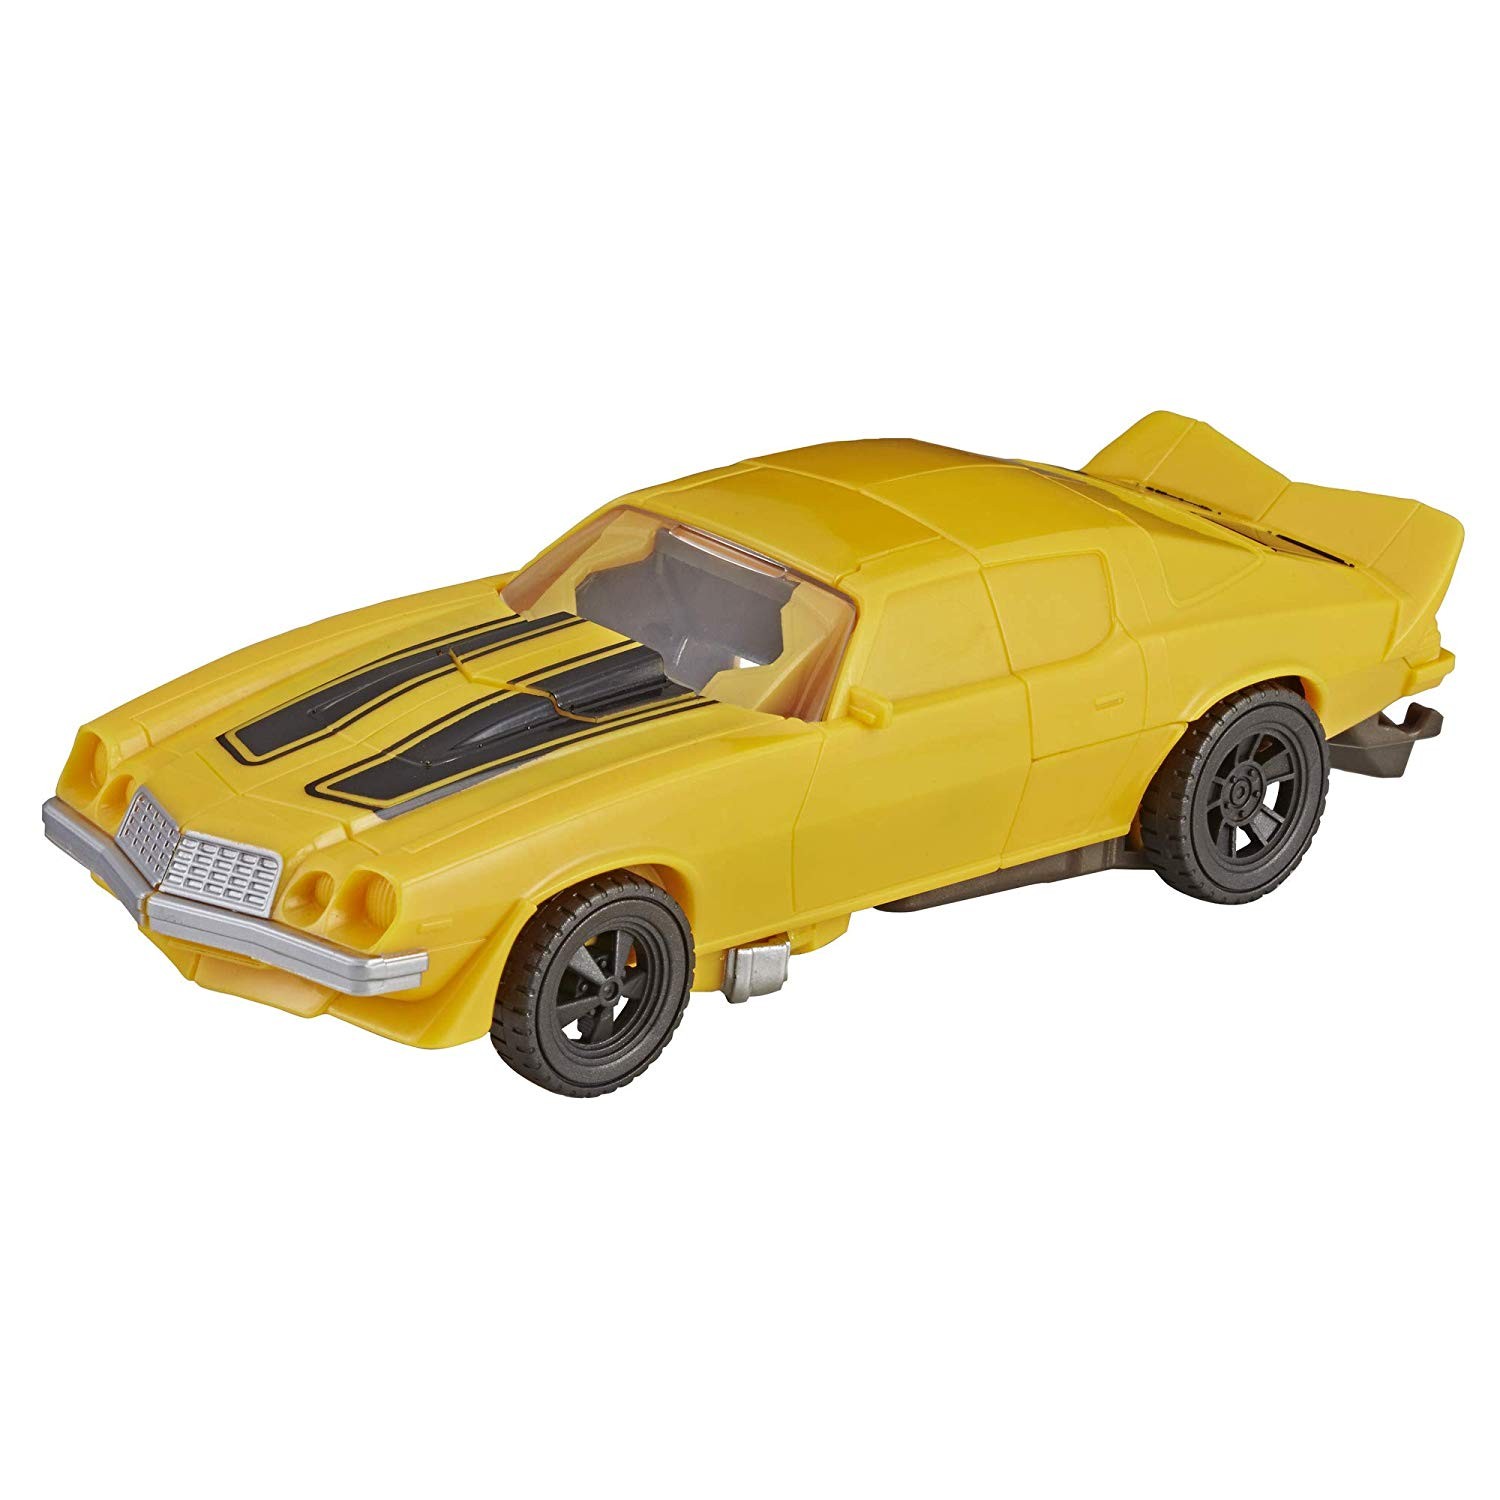 Transformers News: Transformers Bumblebee Mission Vision Bumblebee and Shatter revealed